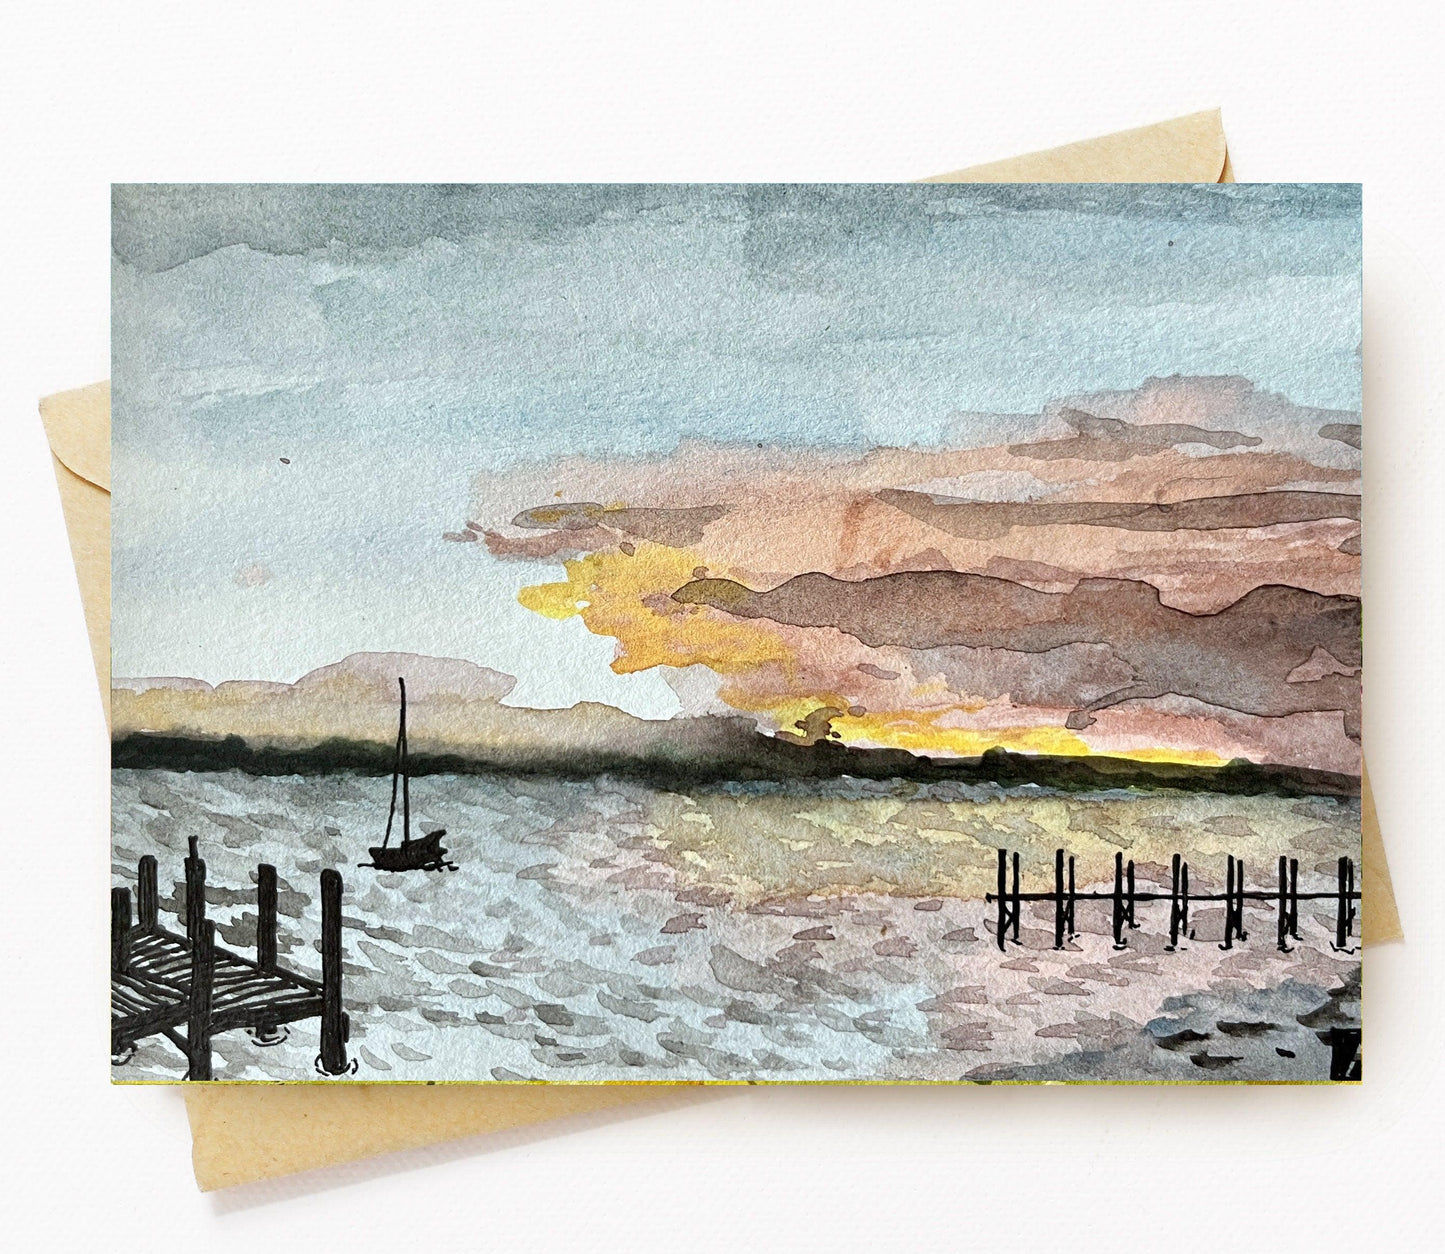 BellavanceInk: Greeting Card With Watercolor Bayside Scape At Harbor Island Bahamas Dunmore Town  5 x 7 Inches - BellavanceInk